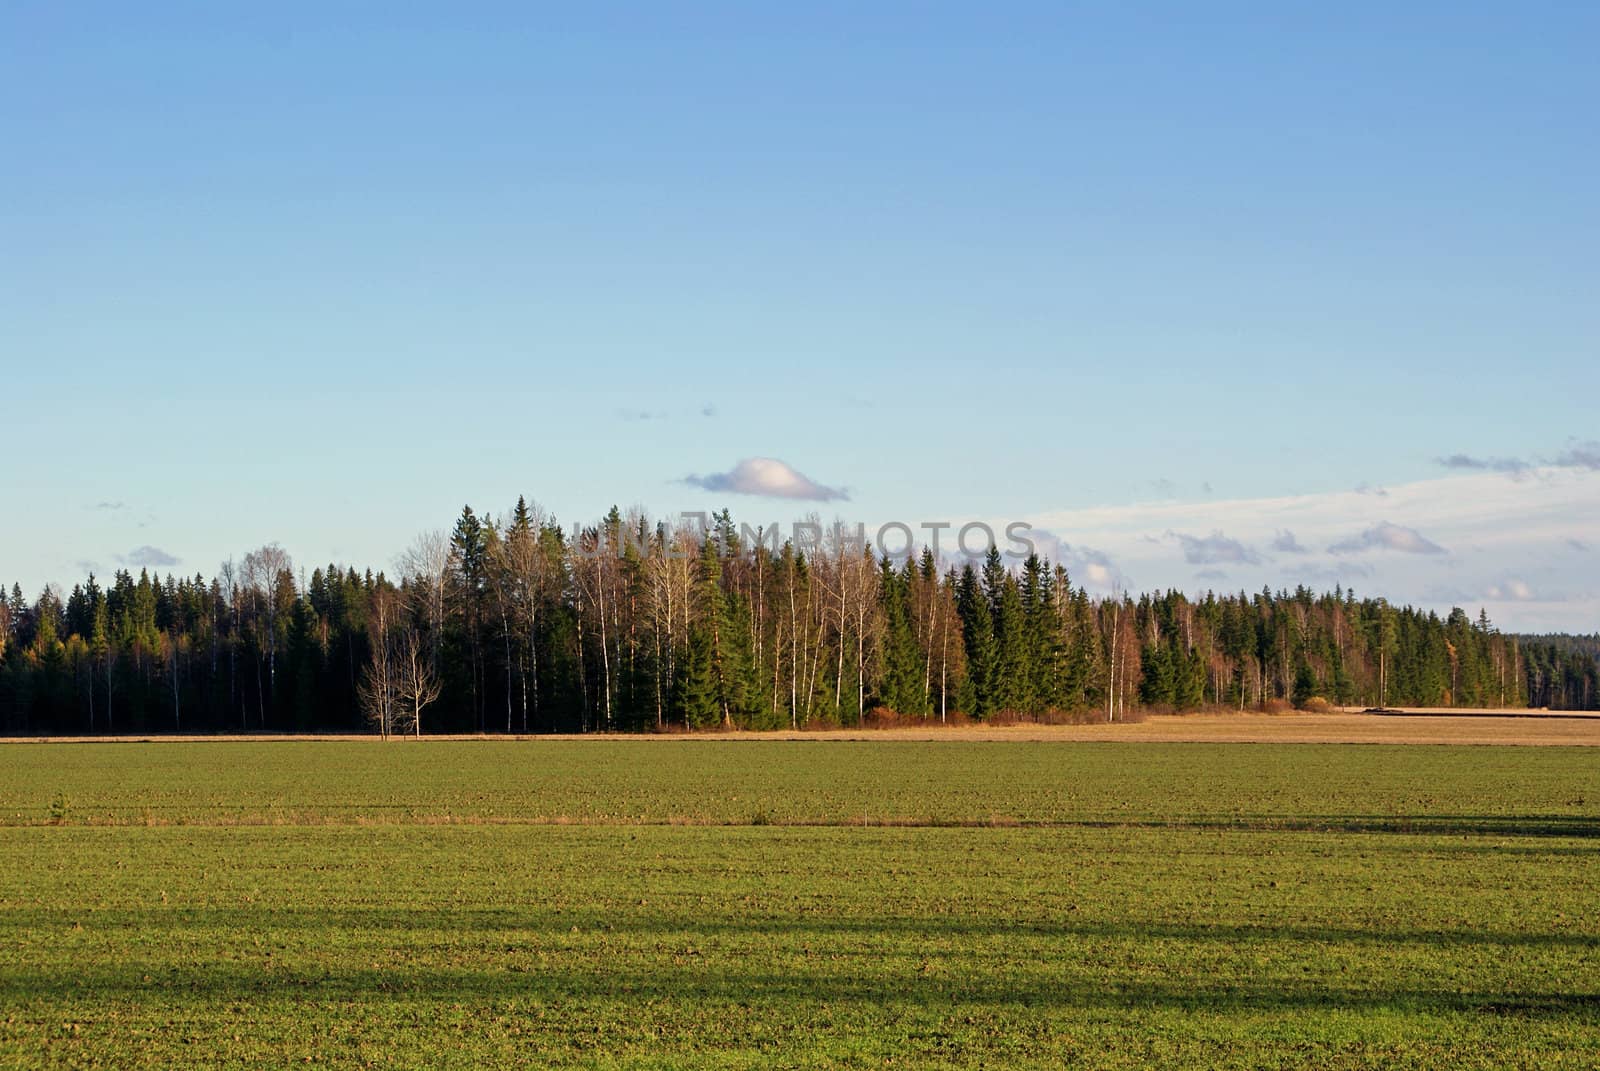 Green, cultivated field and the blue sky in late autumn. Photographed in Tammela, Finland in October 2010.